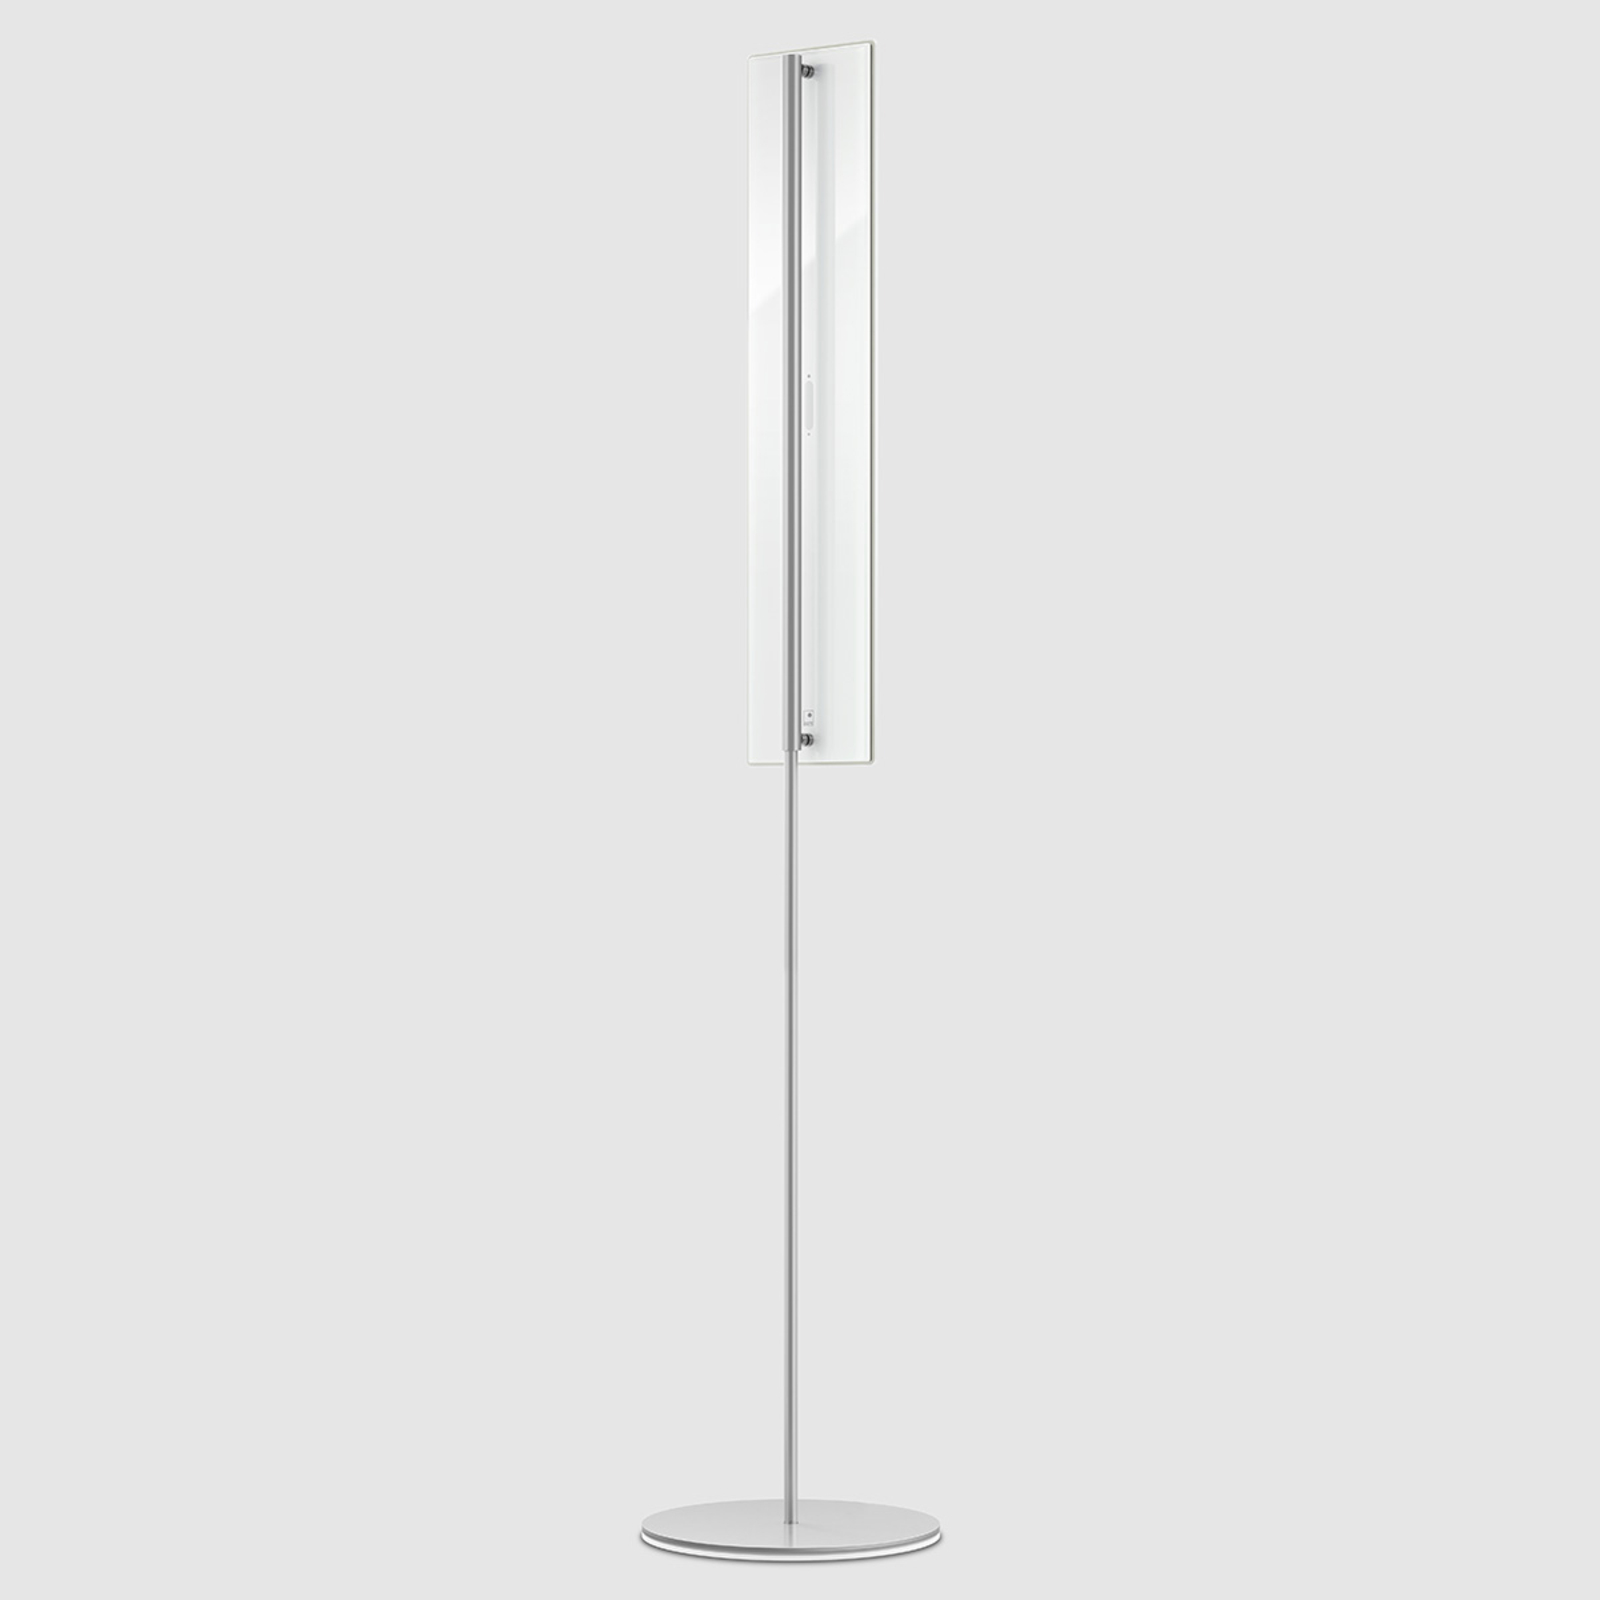 Made in Germany - OMLED One f5 floor lamp white